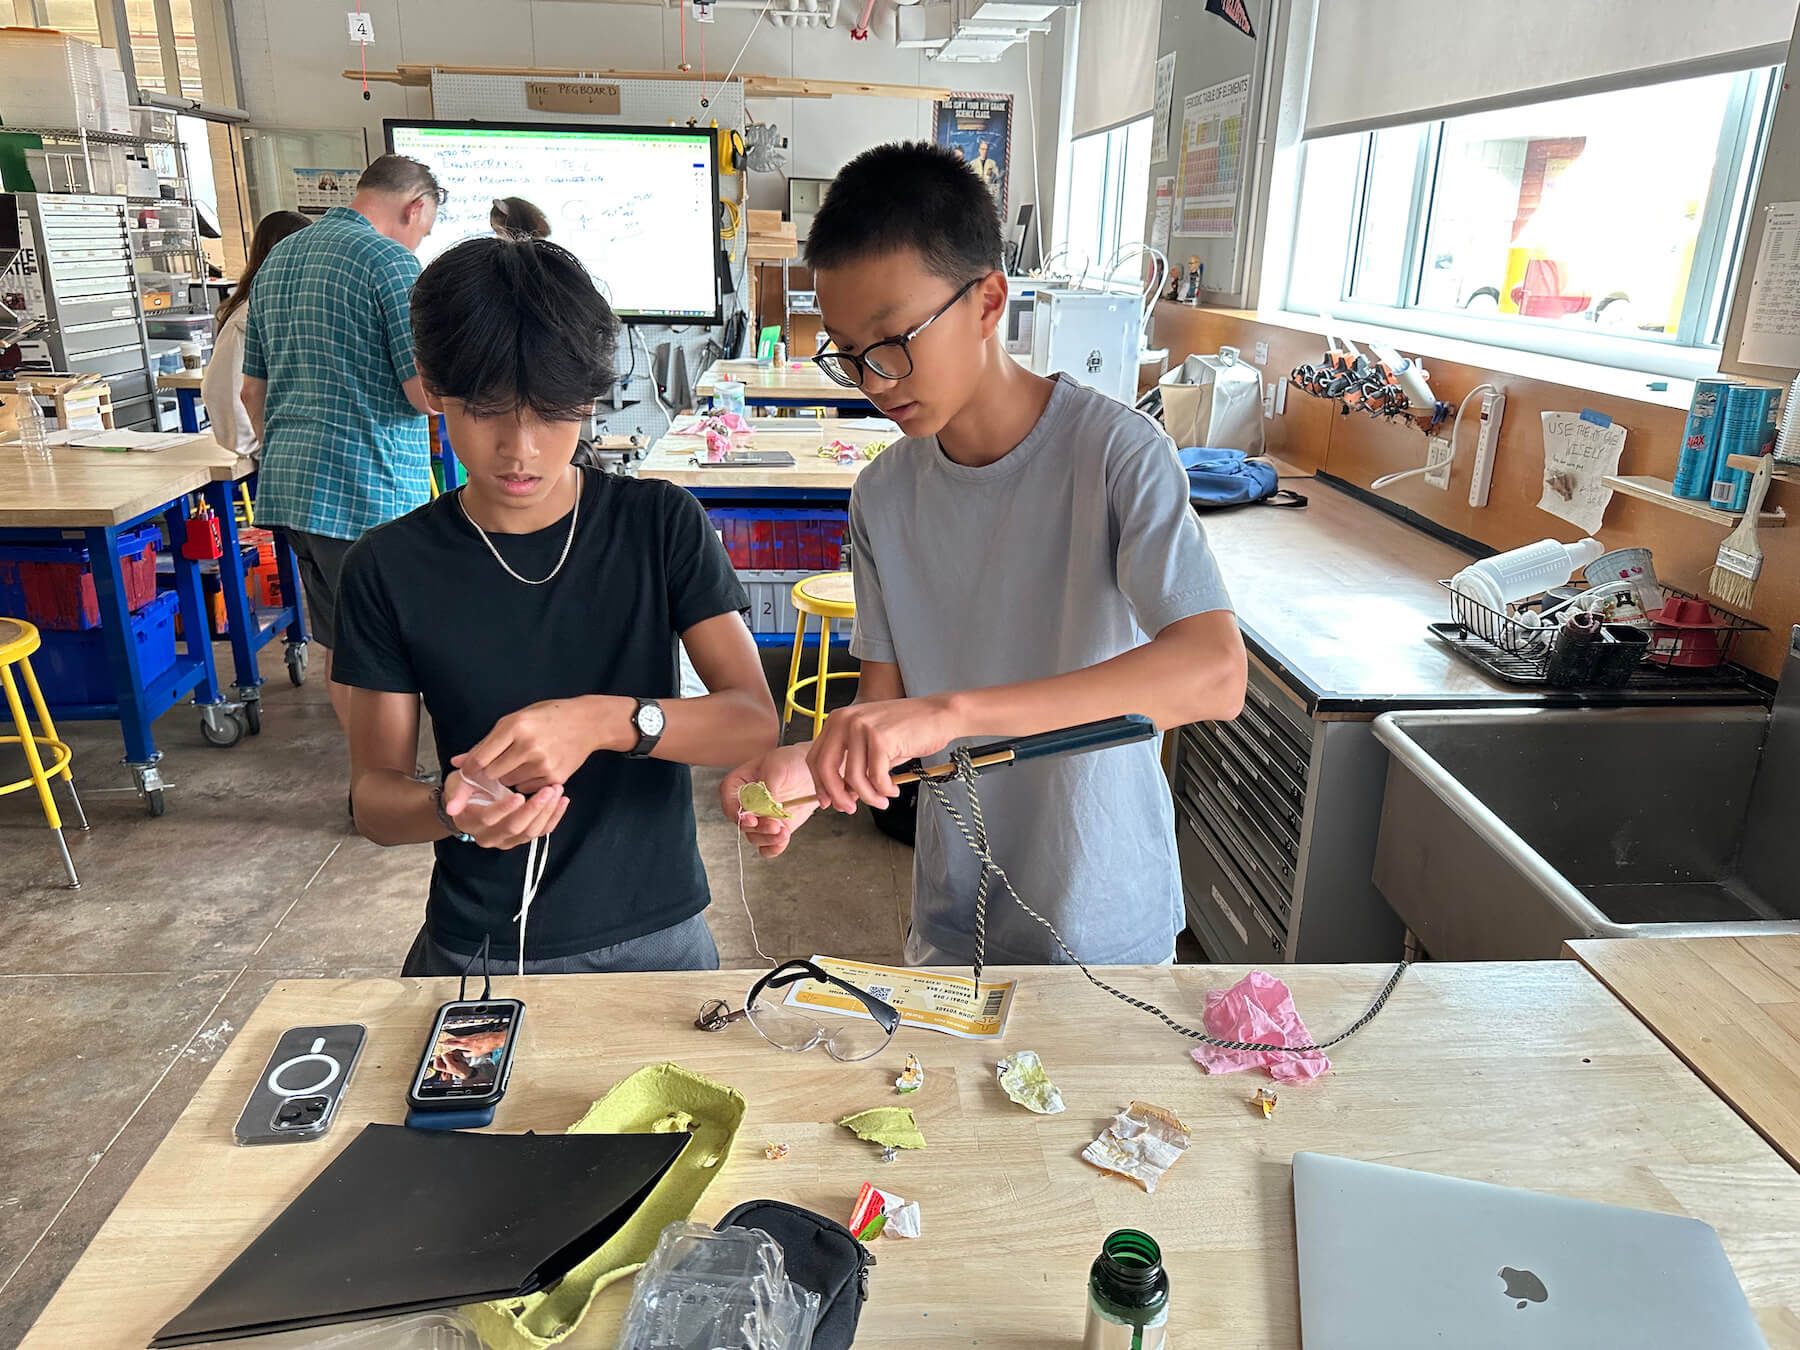 Two Ethical Culture Fieldston School students take an engineering class.